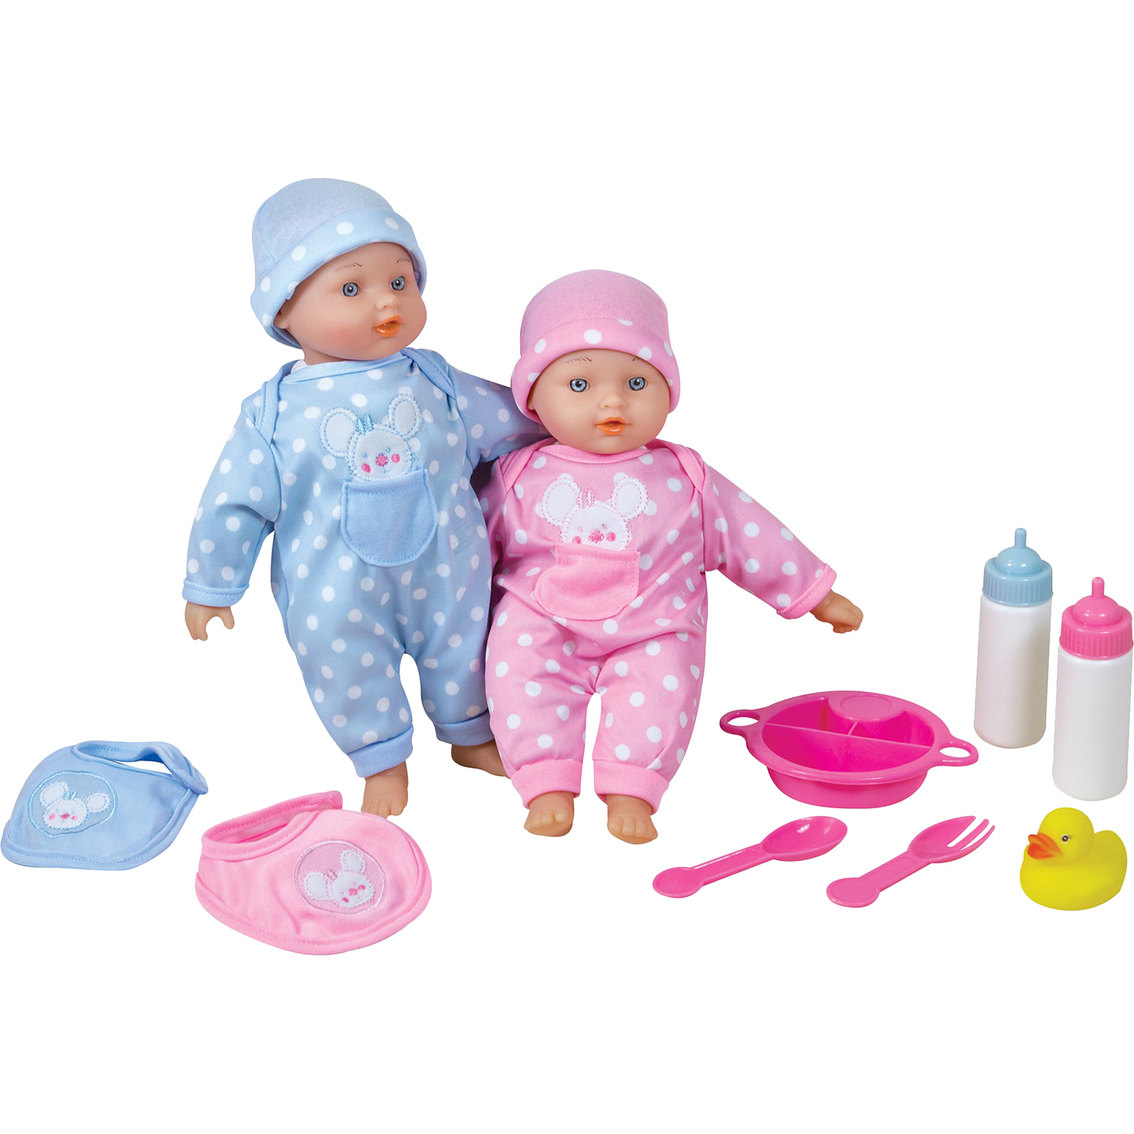 Lissi Dolls 11 in. Twin Baby Doll 10 pc. Play Set - Image 2 of 2